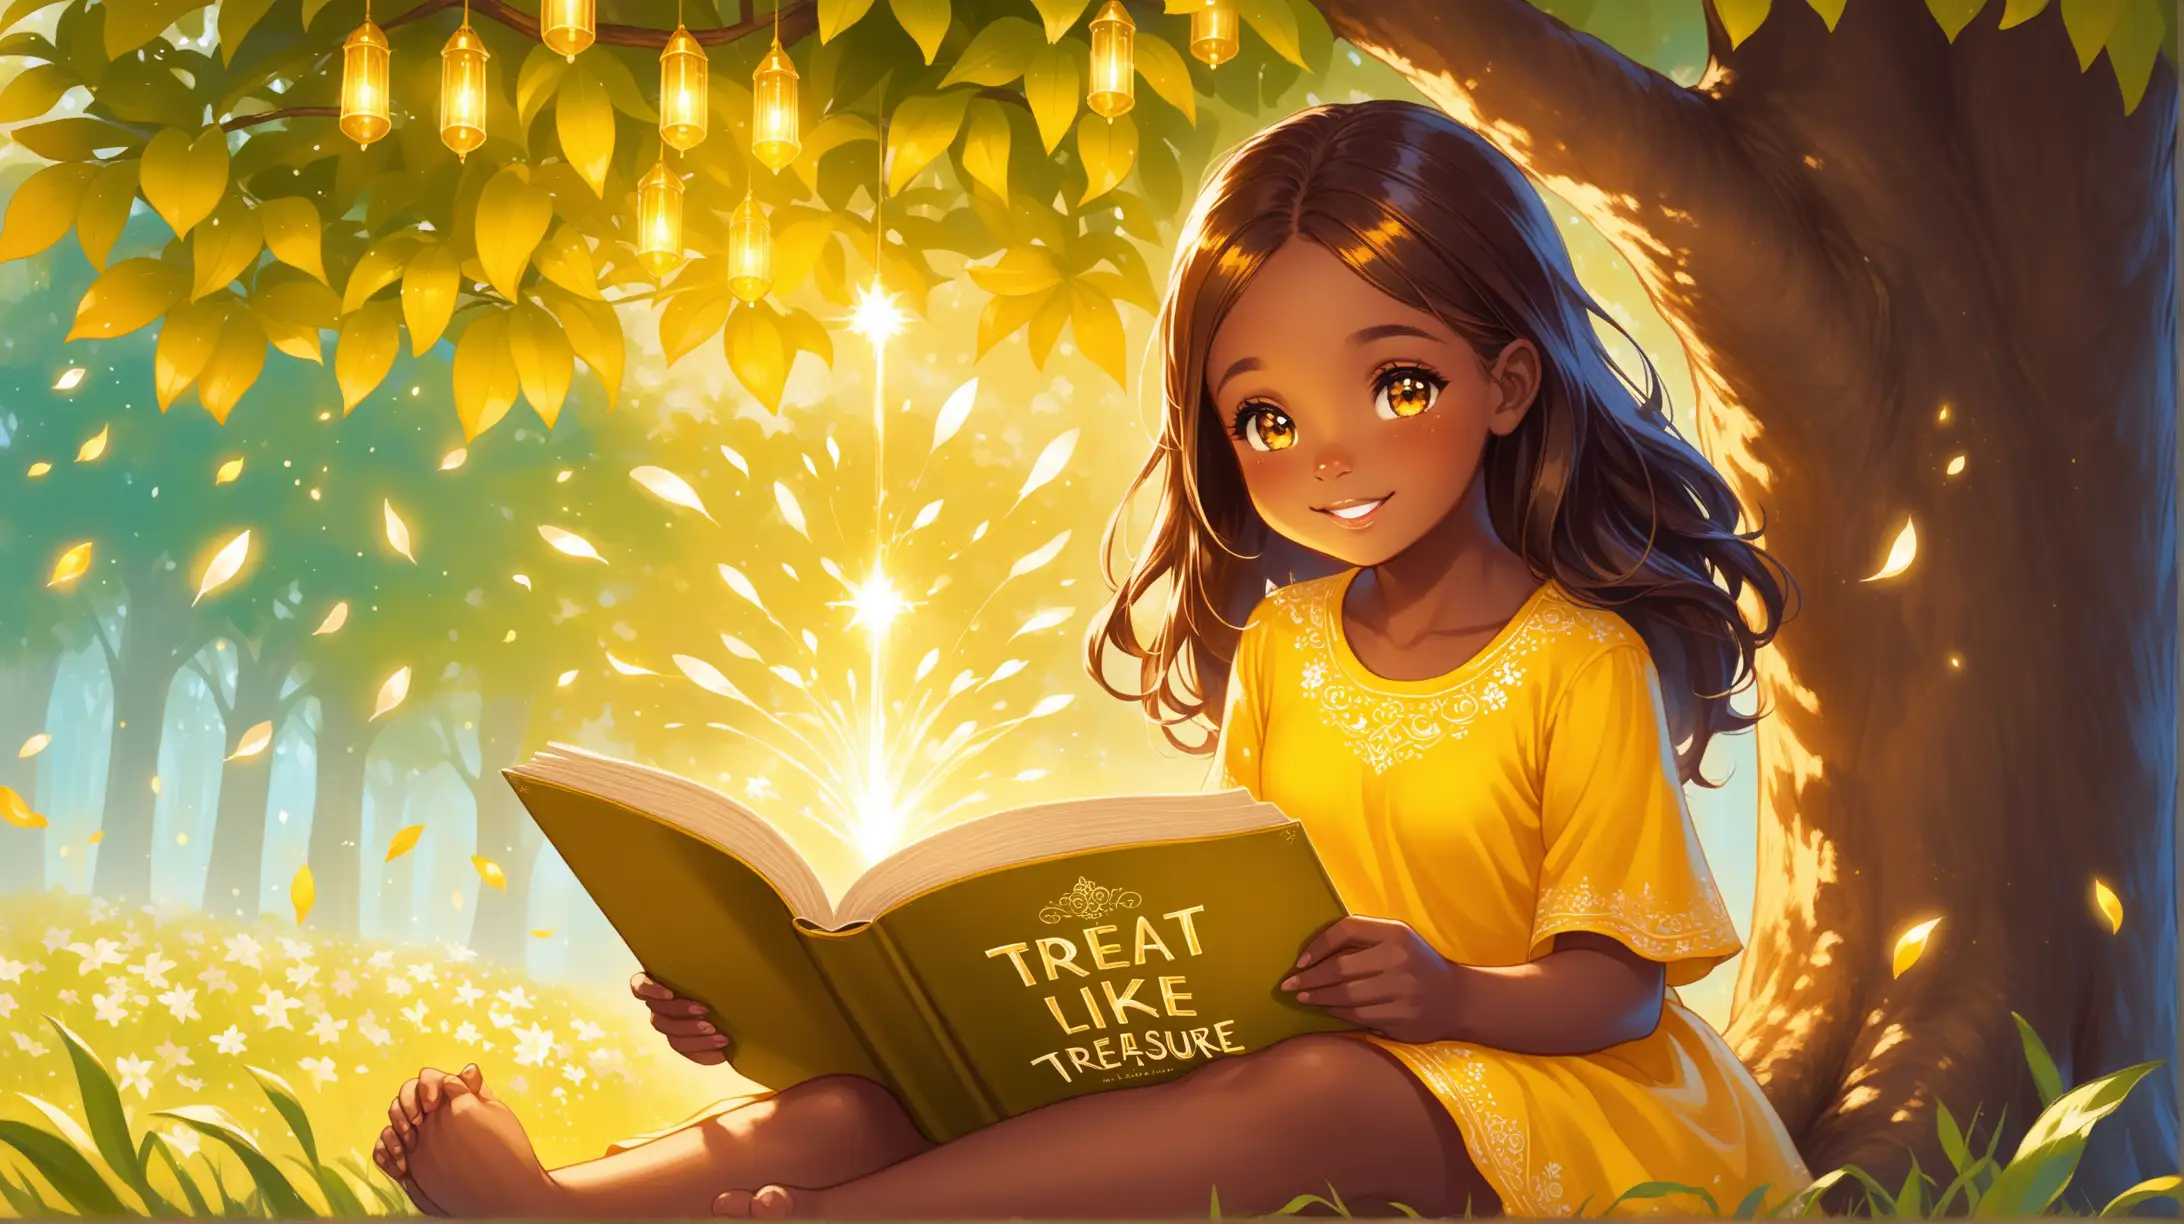 Lily a cheerful interracial girl with a spark of kindness in her eyes, sitting under a tree, reading a book with a golden glow emanating from its pages, depicting the words "Treat Others Like Treasure."